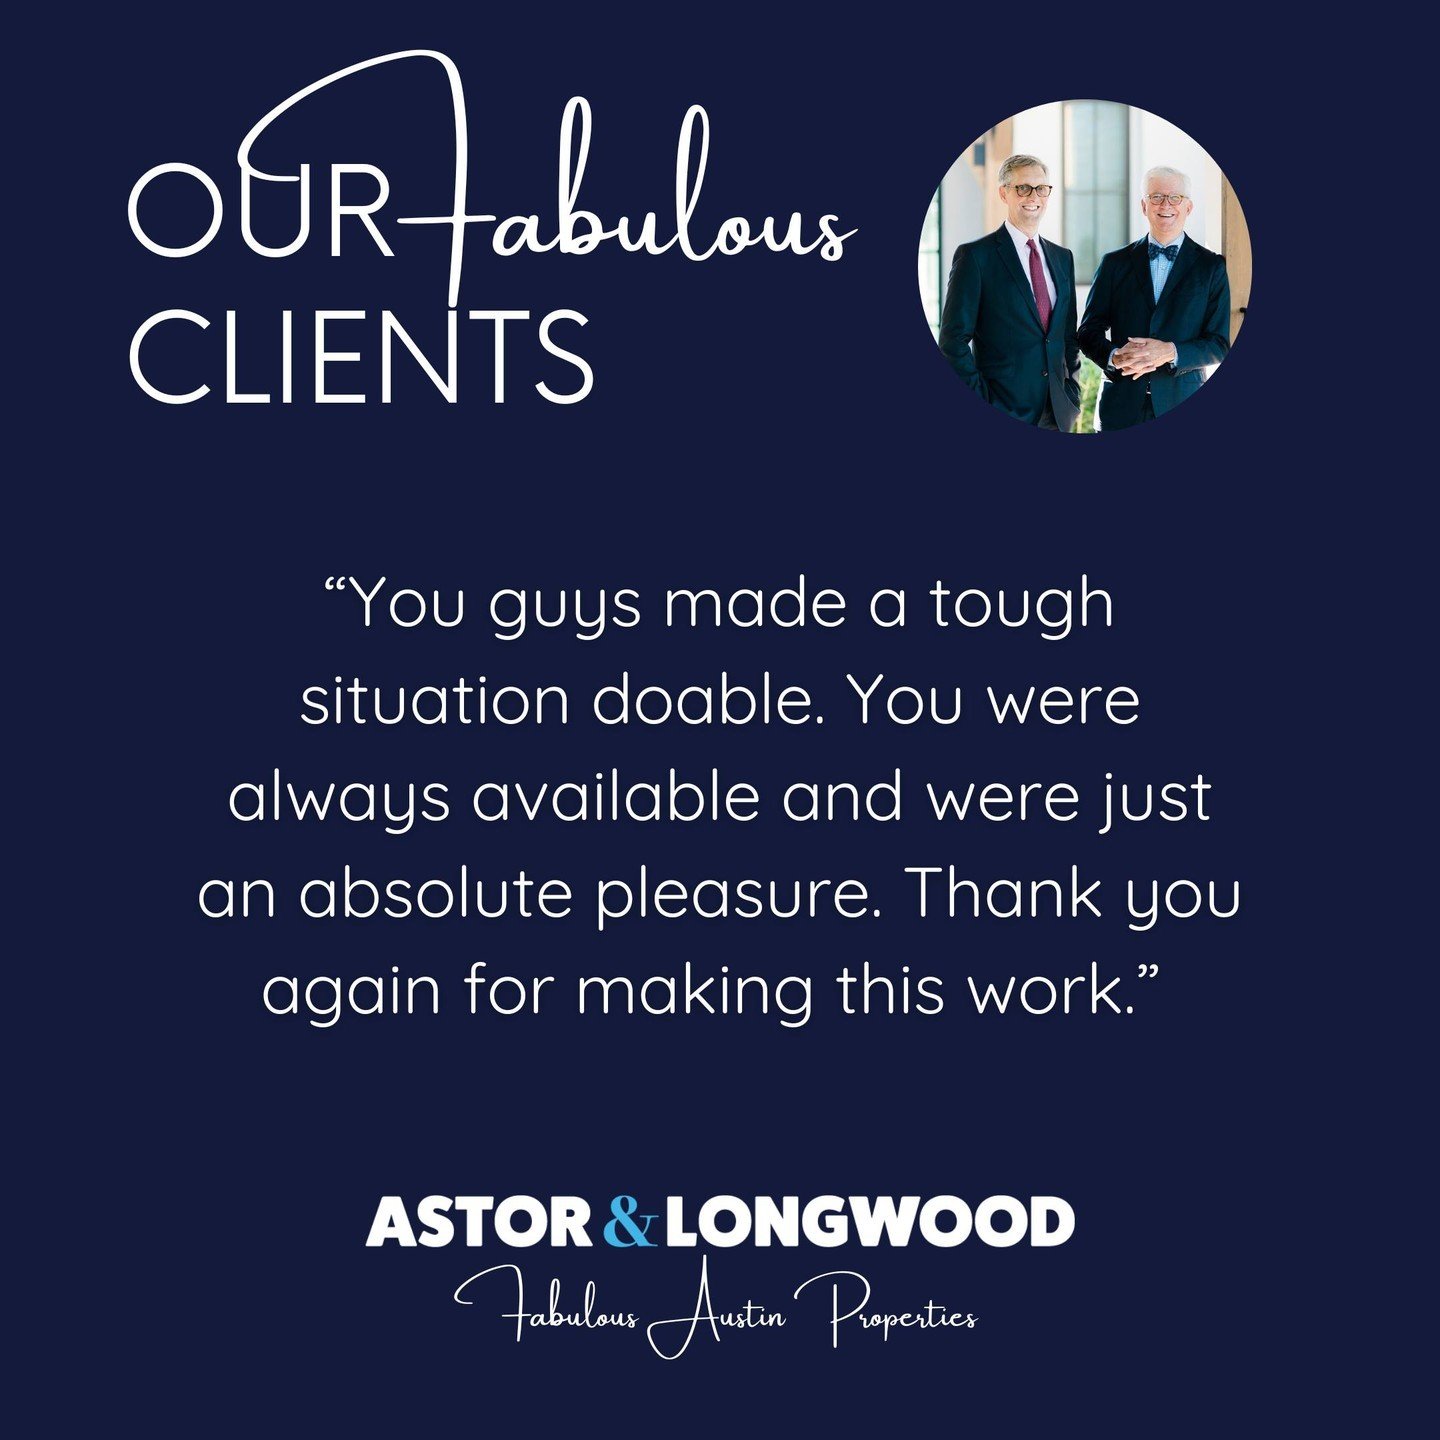 When our clients experience a difficult situation during the home buying or selling process, we don't just sit back and say, &quot;Tough luck.&quot; Instead, we tough it out and get the job done! astorlongwood.com

#fabulousaustinproperties #sellinga